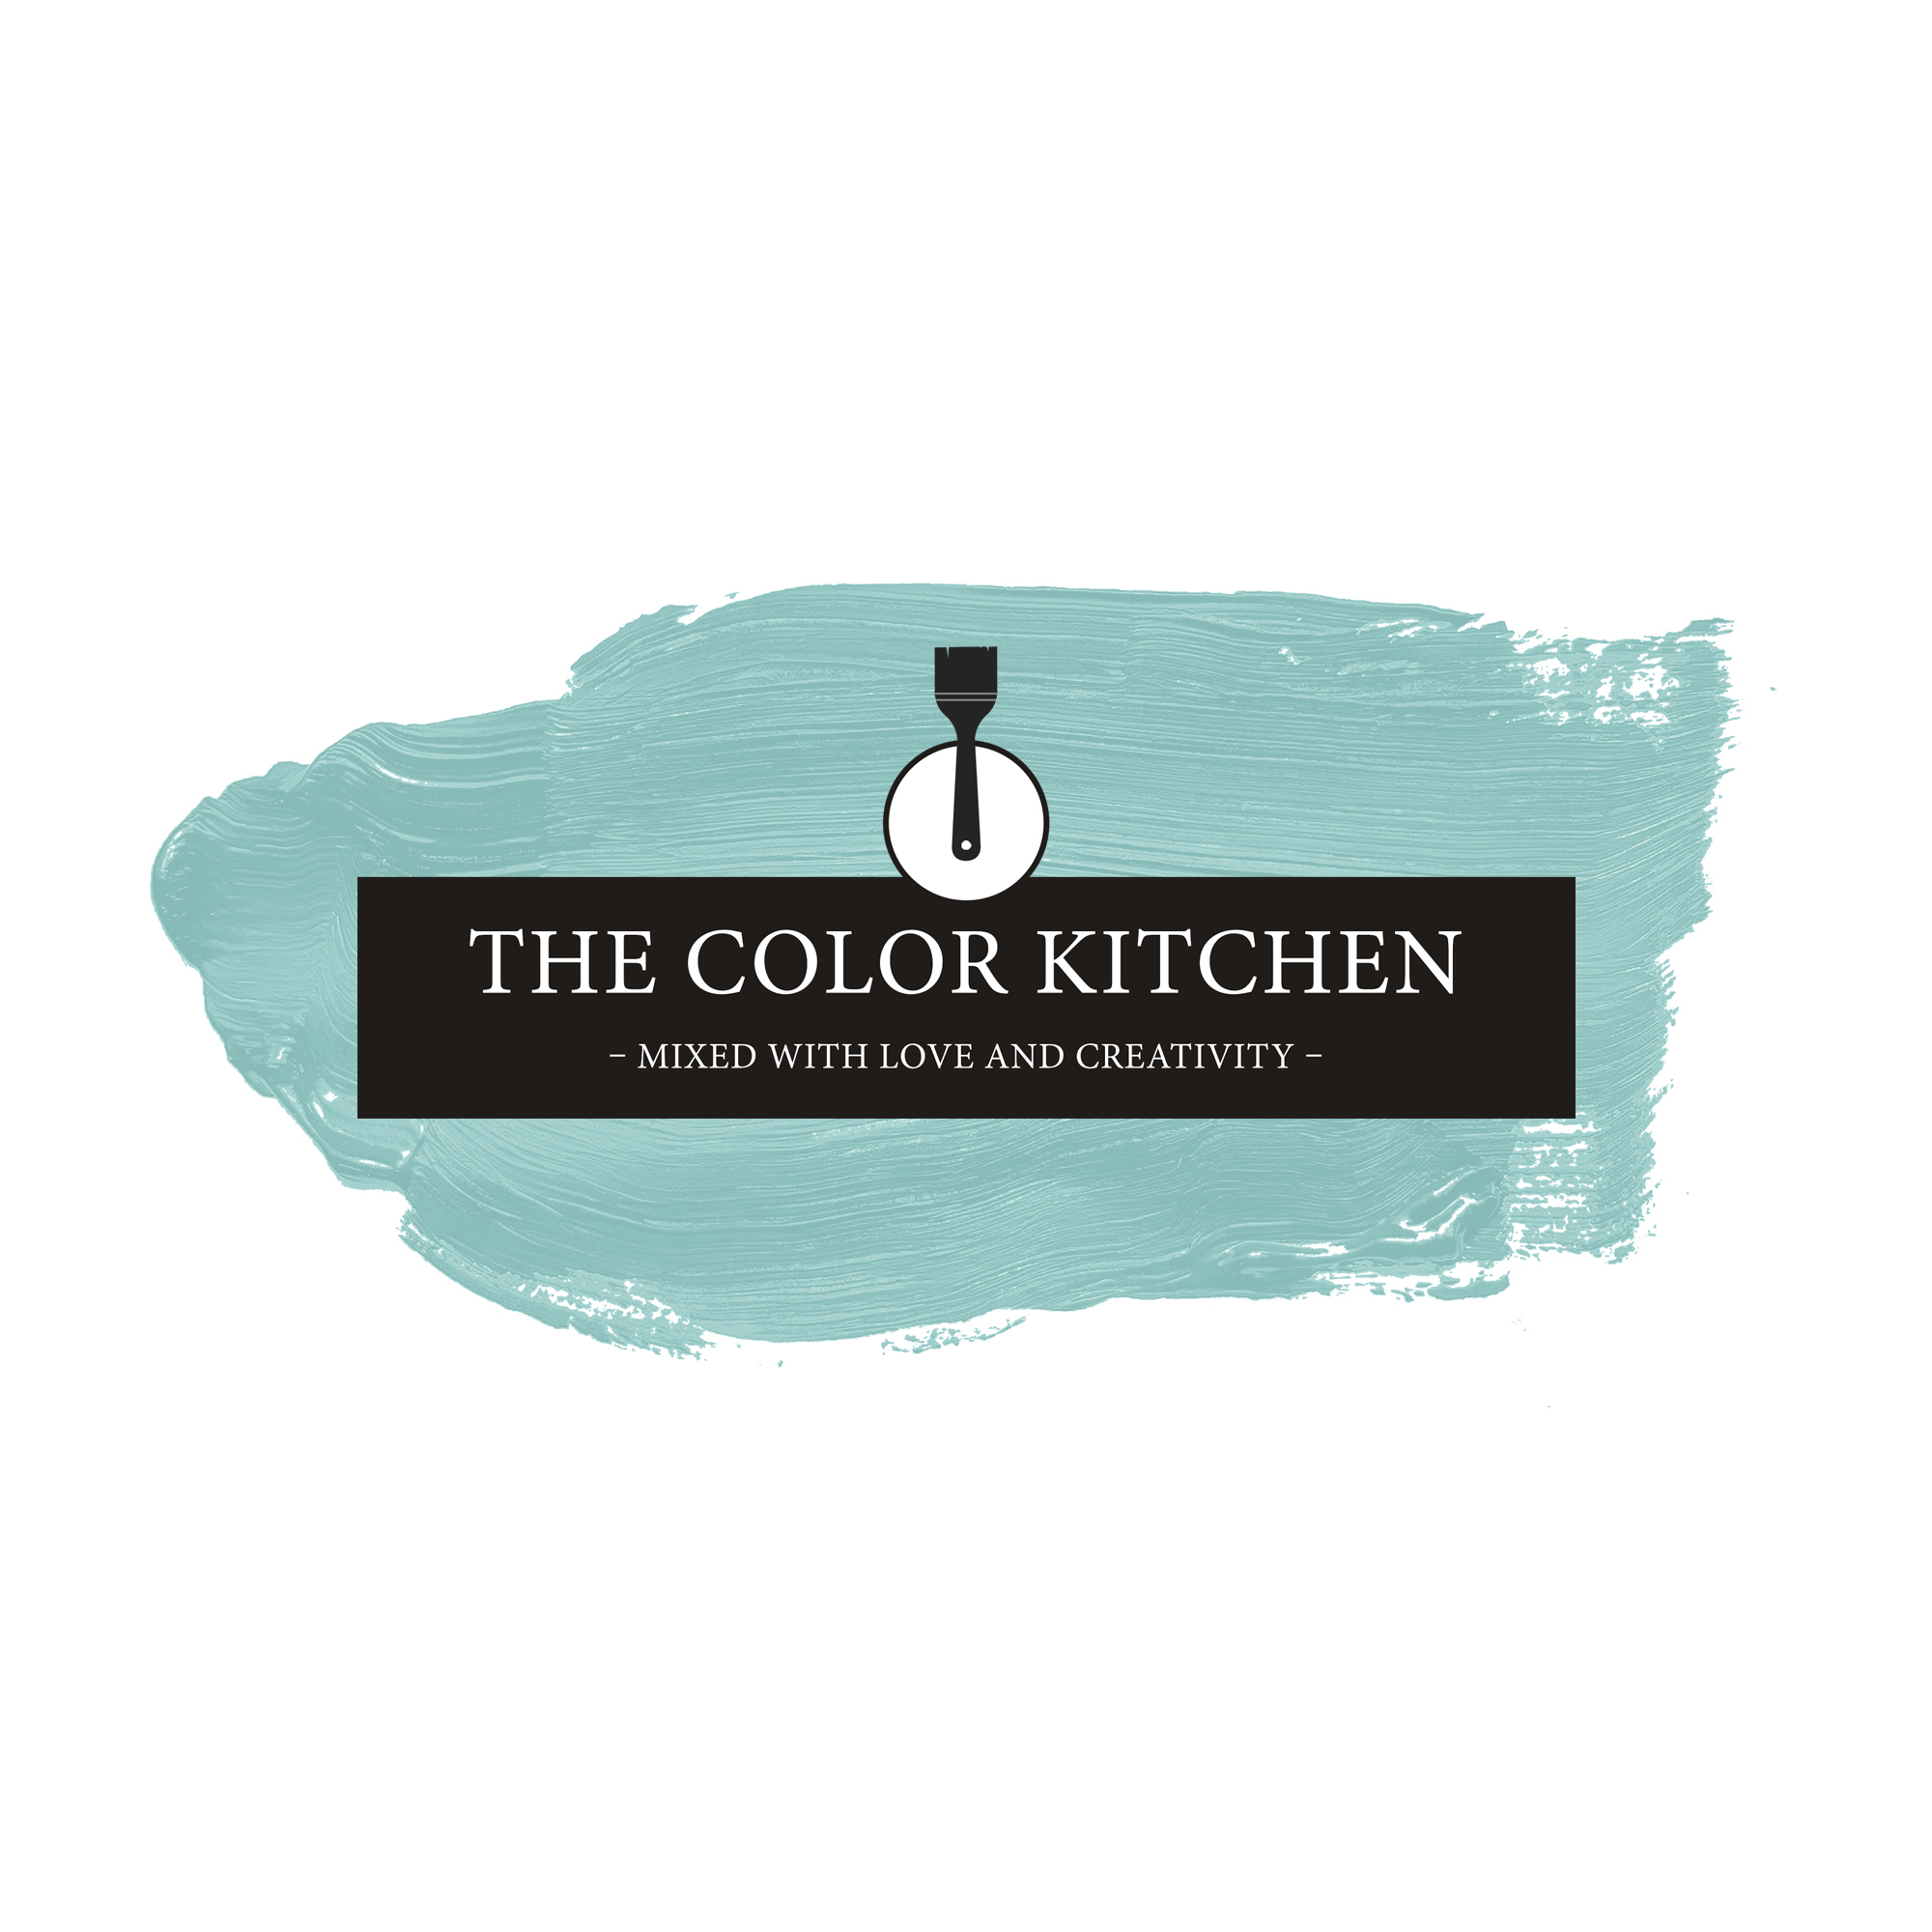 The Color Kitchen Swimming Pool 5 l